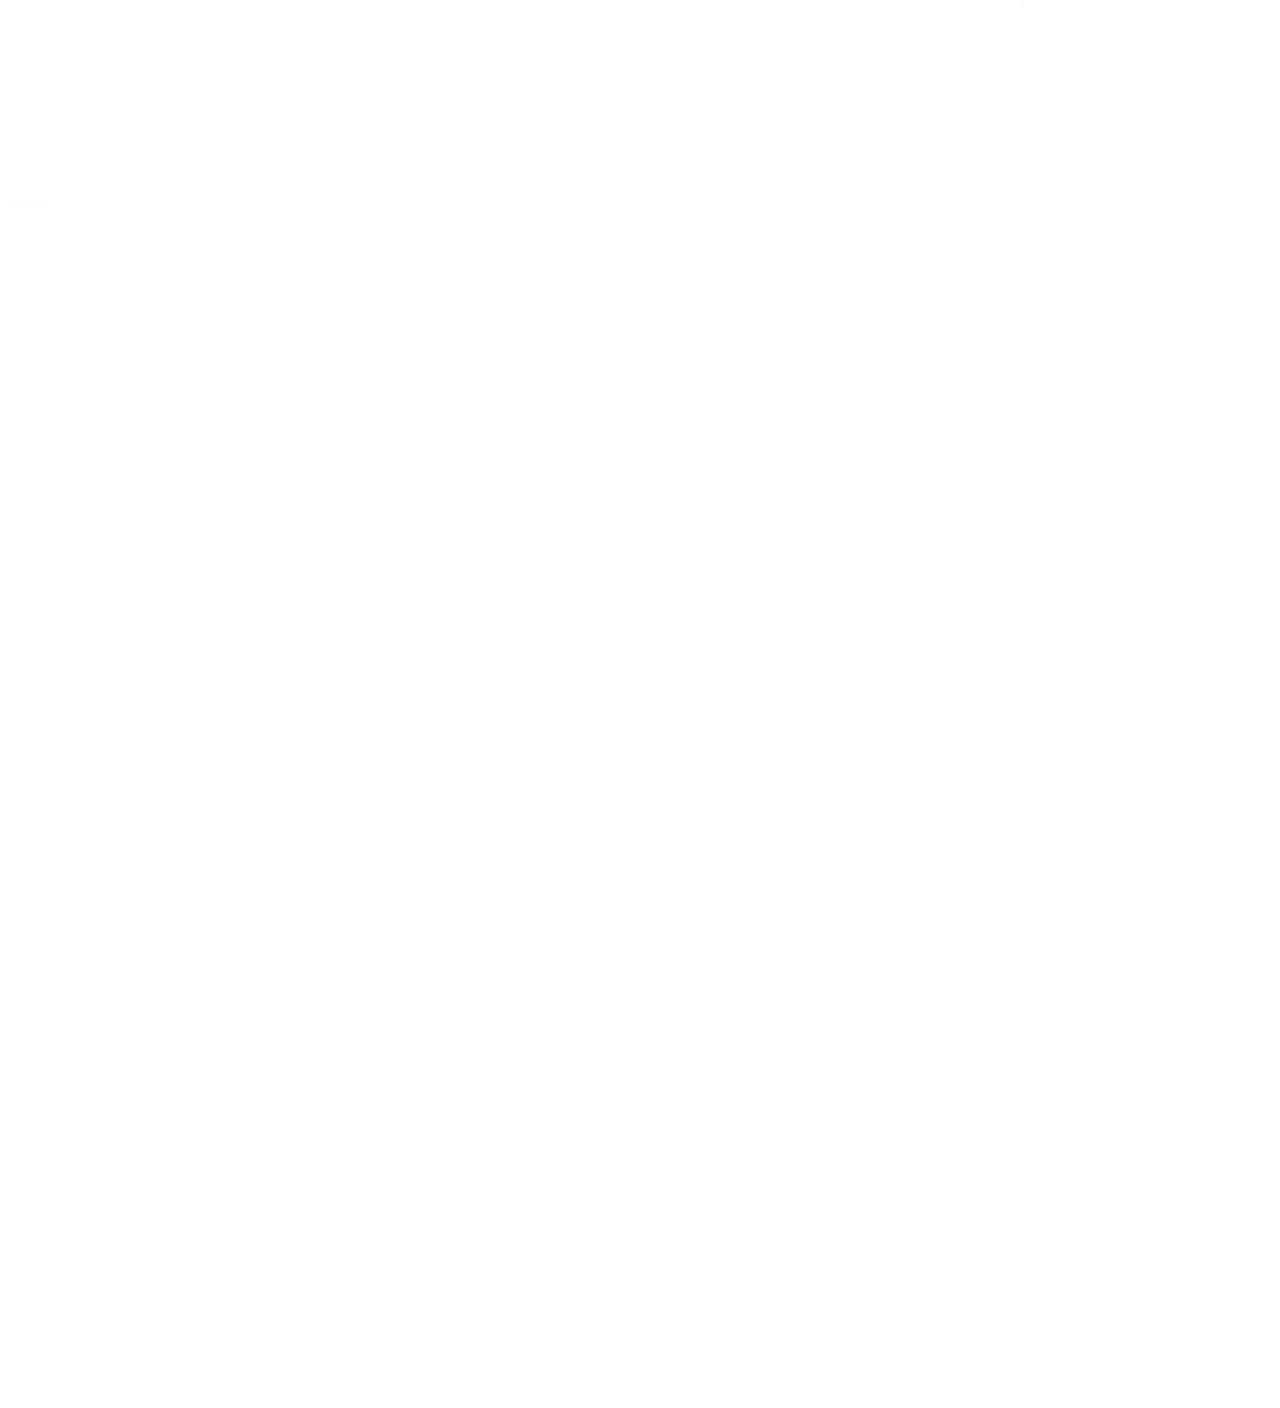 Bring Variety to Your Table